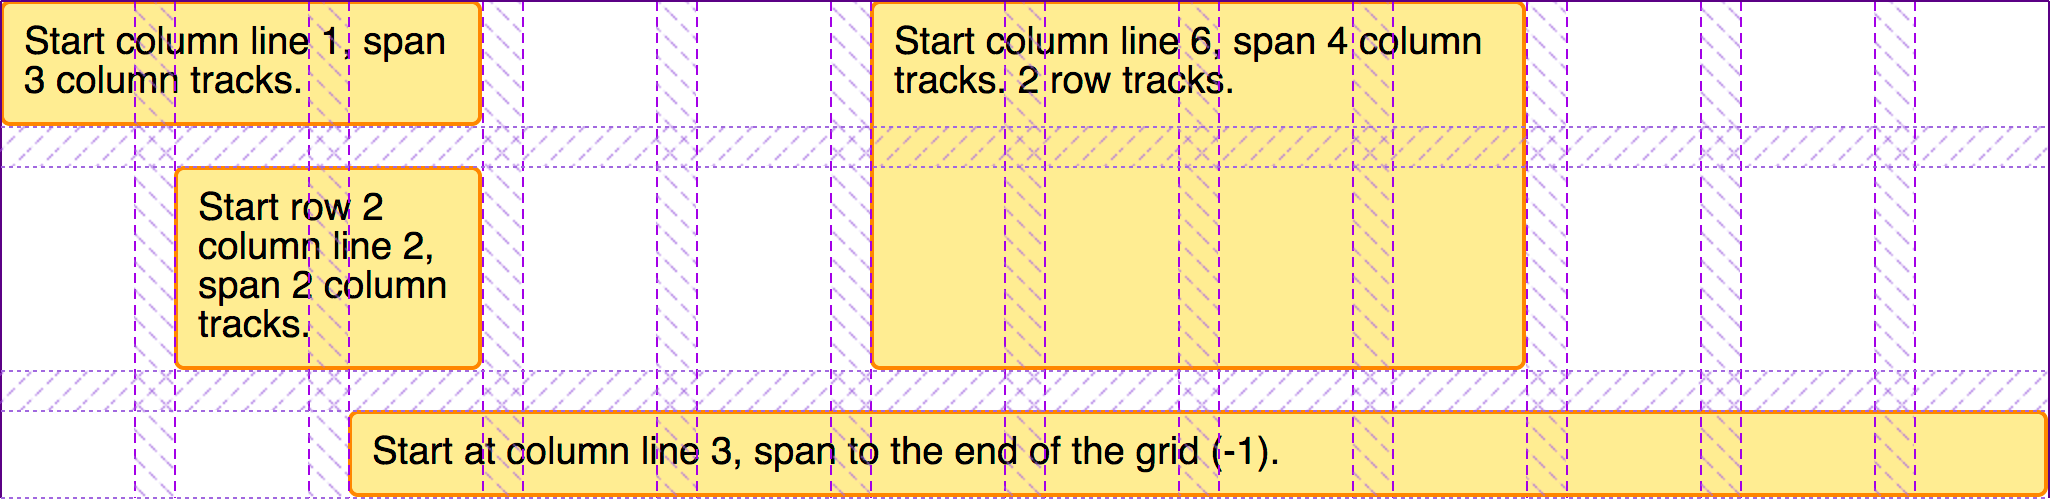 Showing the items placed on the grid with grid tracks highlighted.